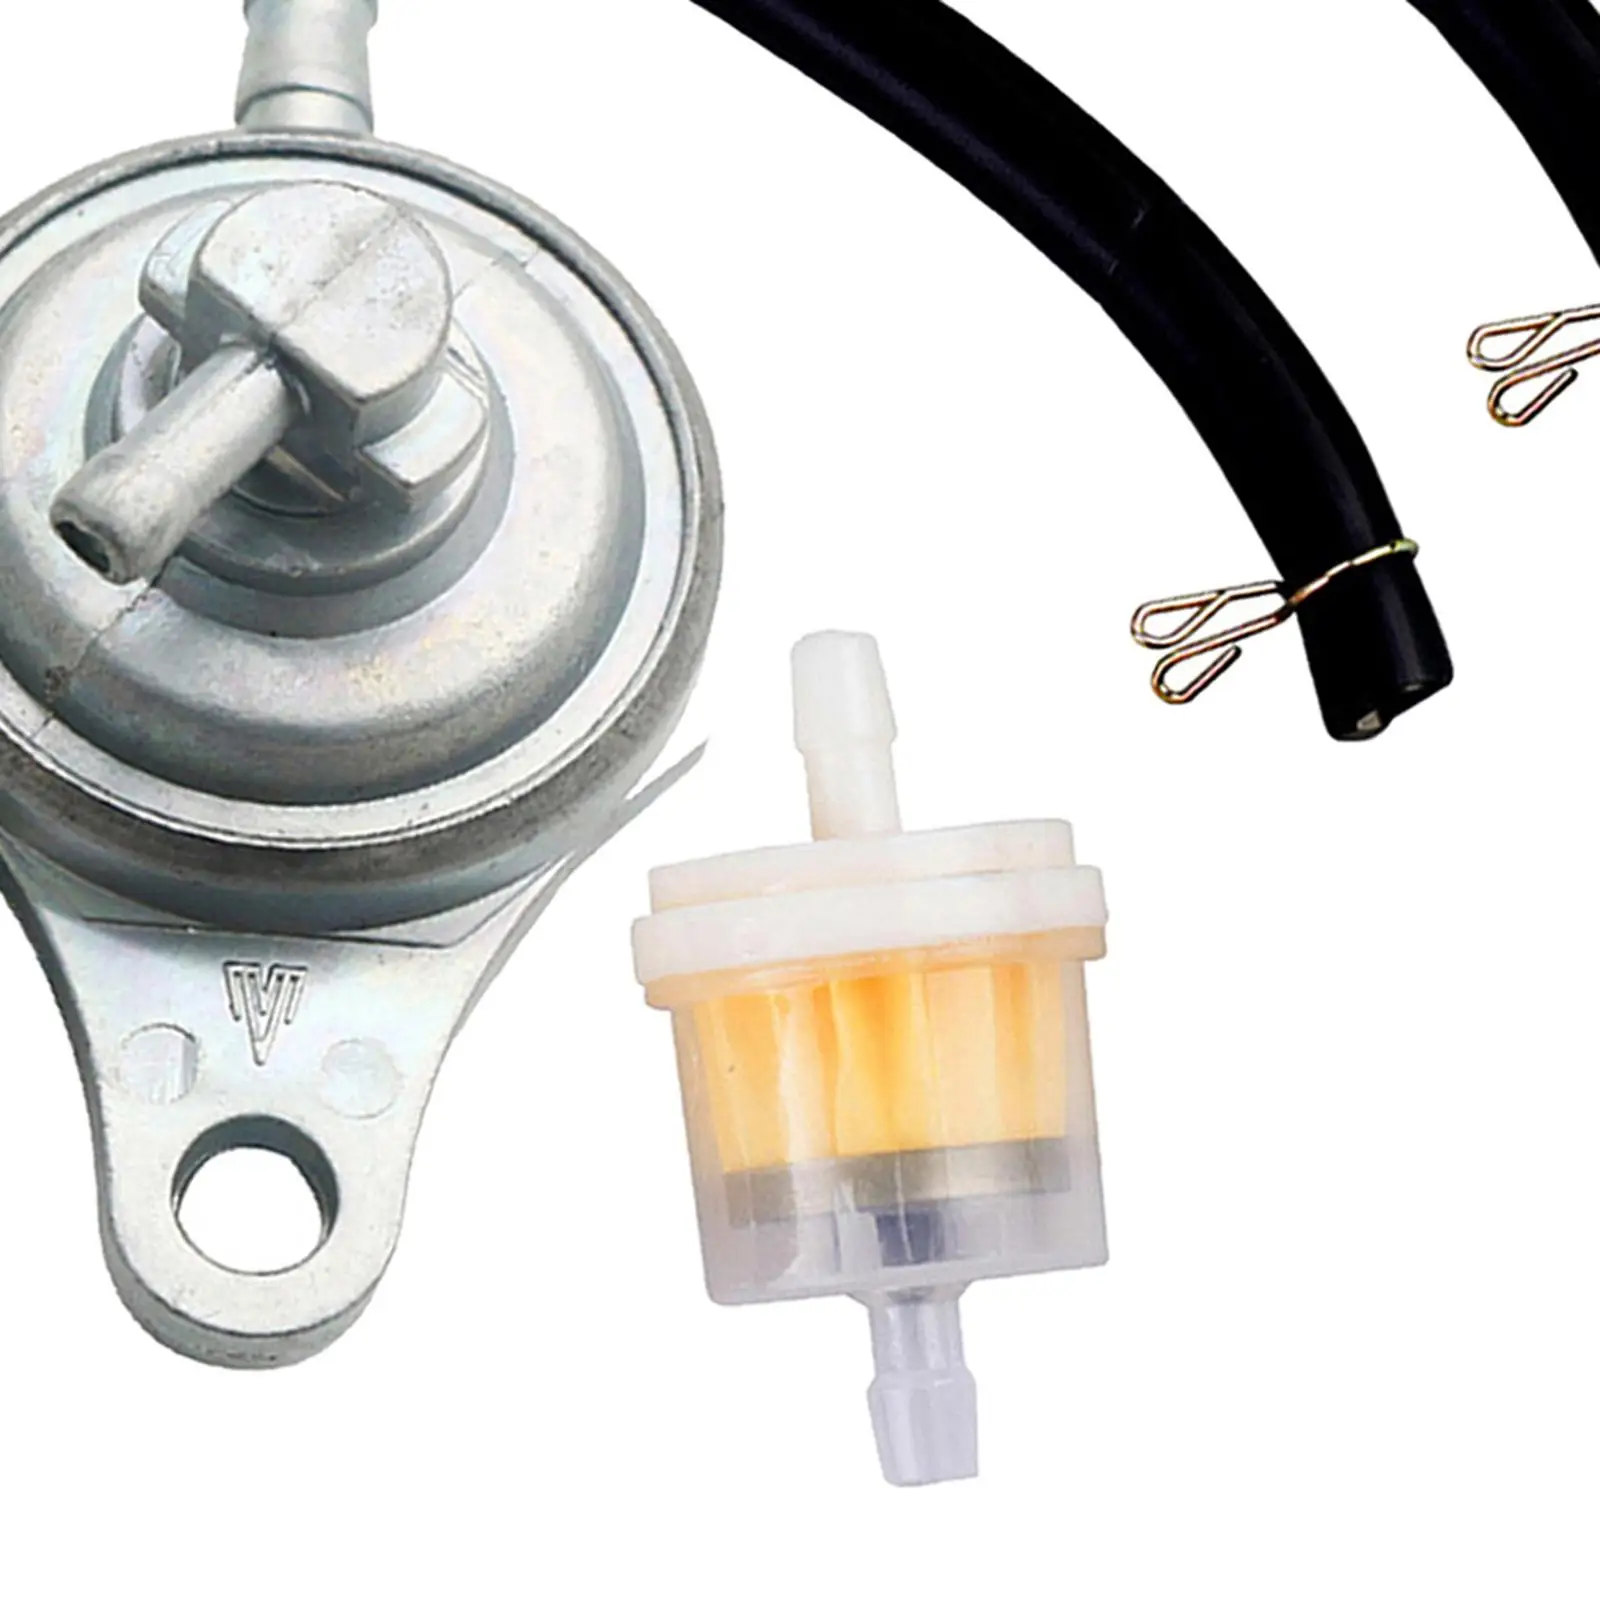 Fuel Oil Petcock Pump Switch/ Replacement/ Motorcycle Parts/ Accessories/ Shut Off Switch for 50cc 125cc 150cc Gy6 Engine ATV